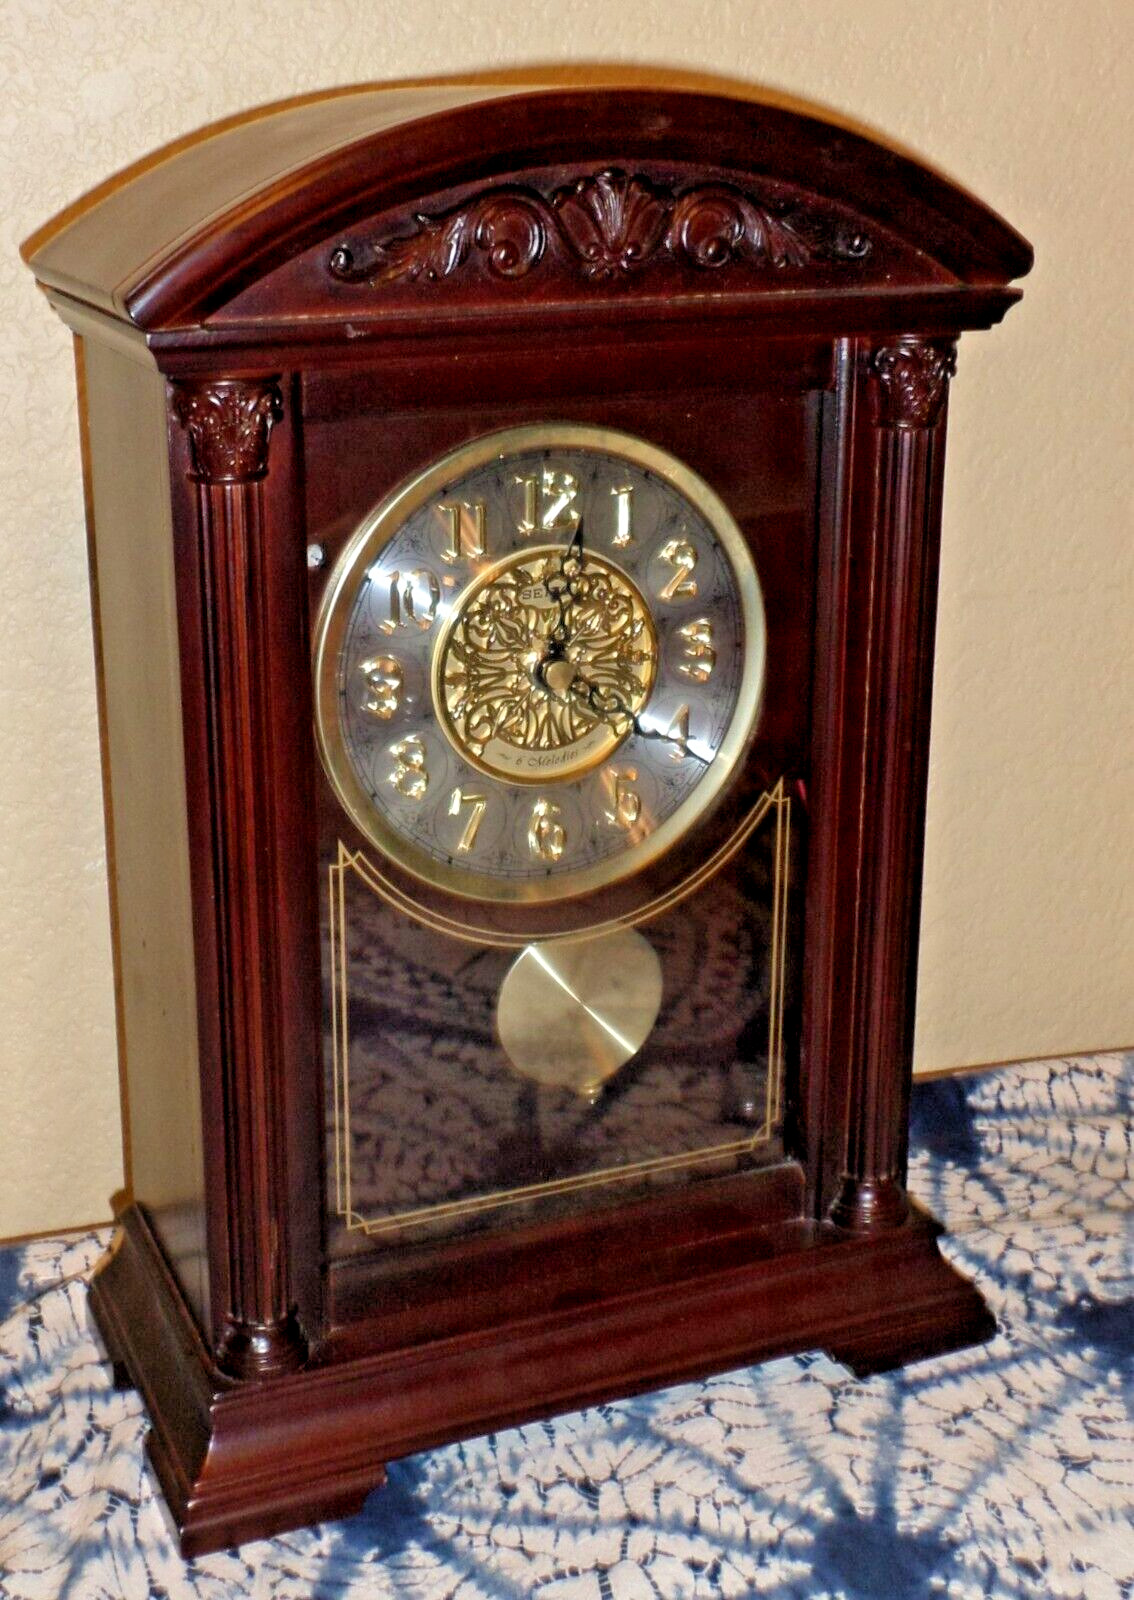 VERY NICE SEIKO CLASSIC 6 MELODIES ON HOUR CHERRY WOOD PARLOR DESK CLOCK